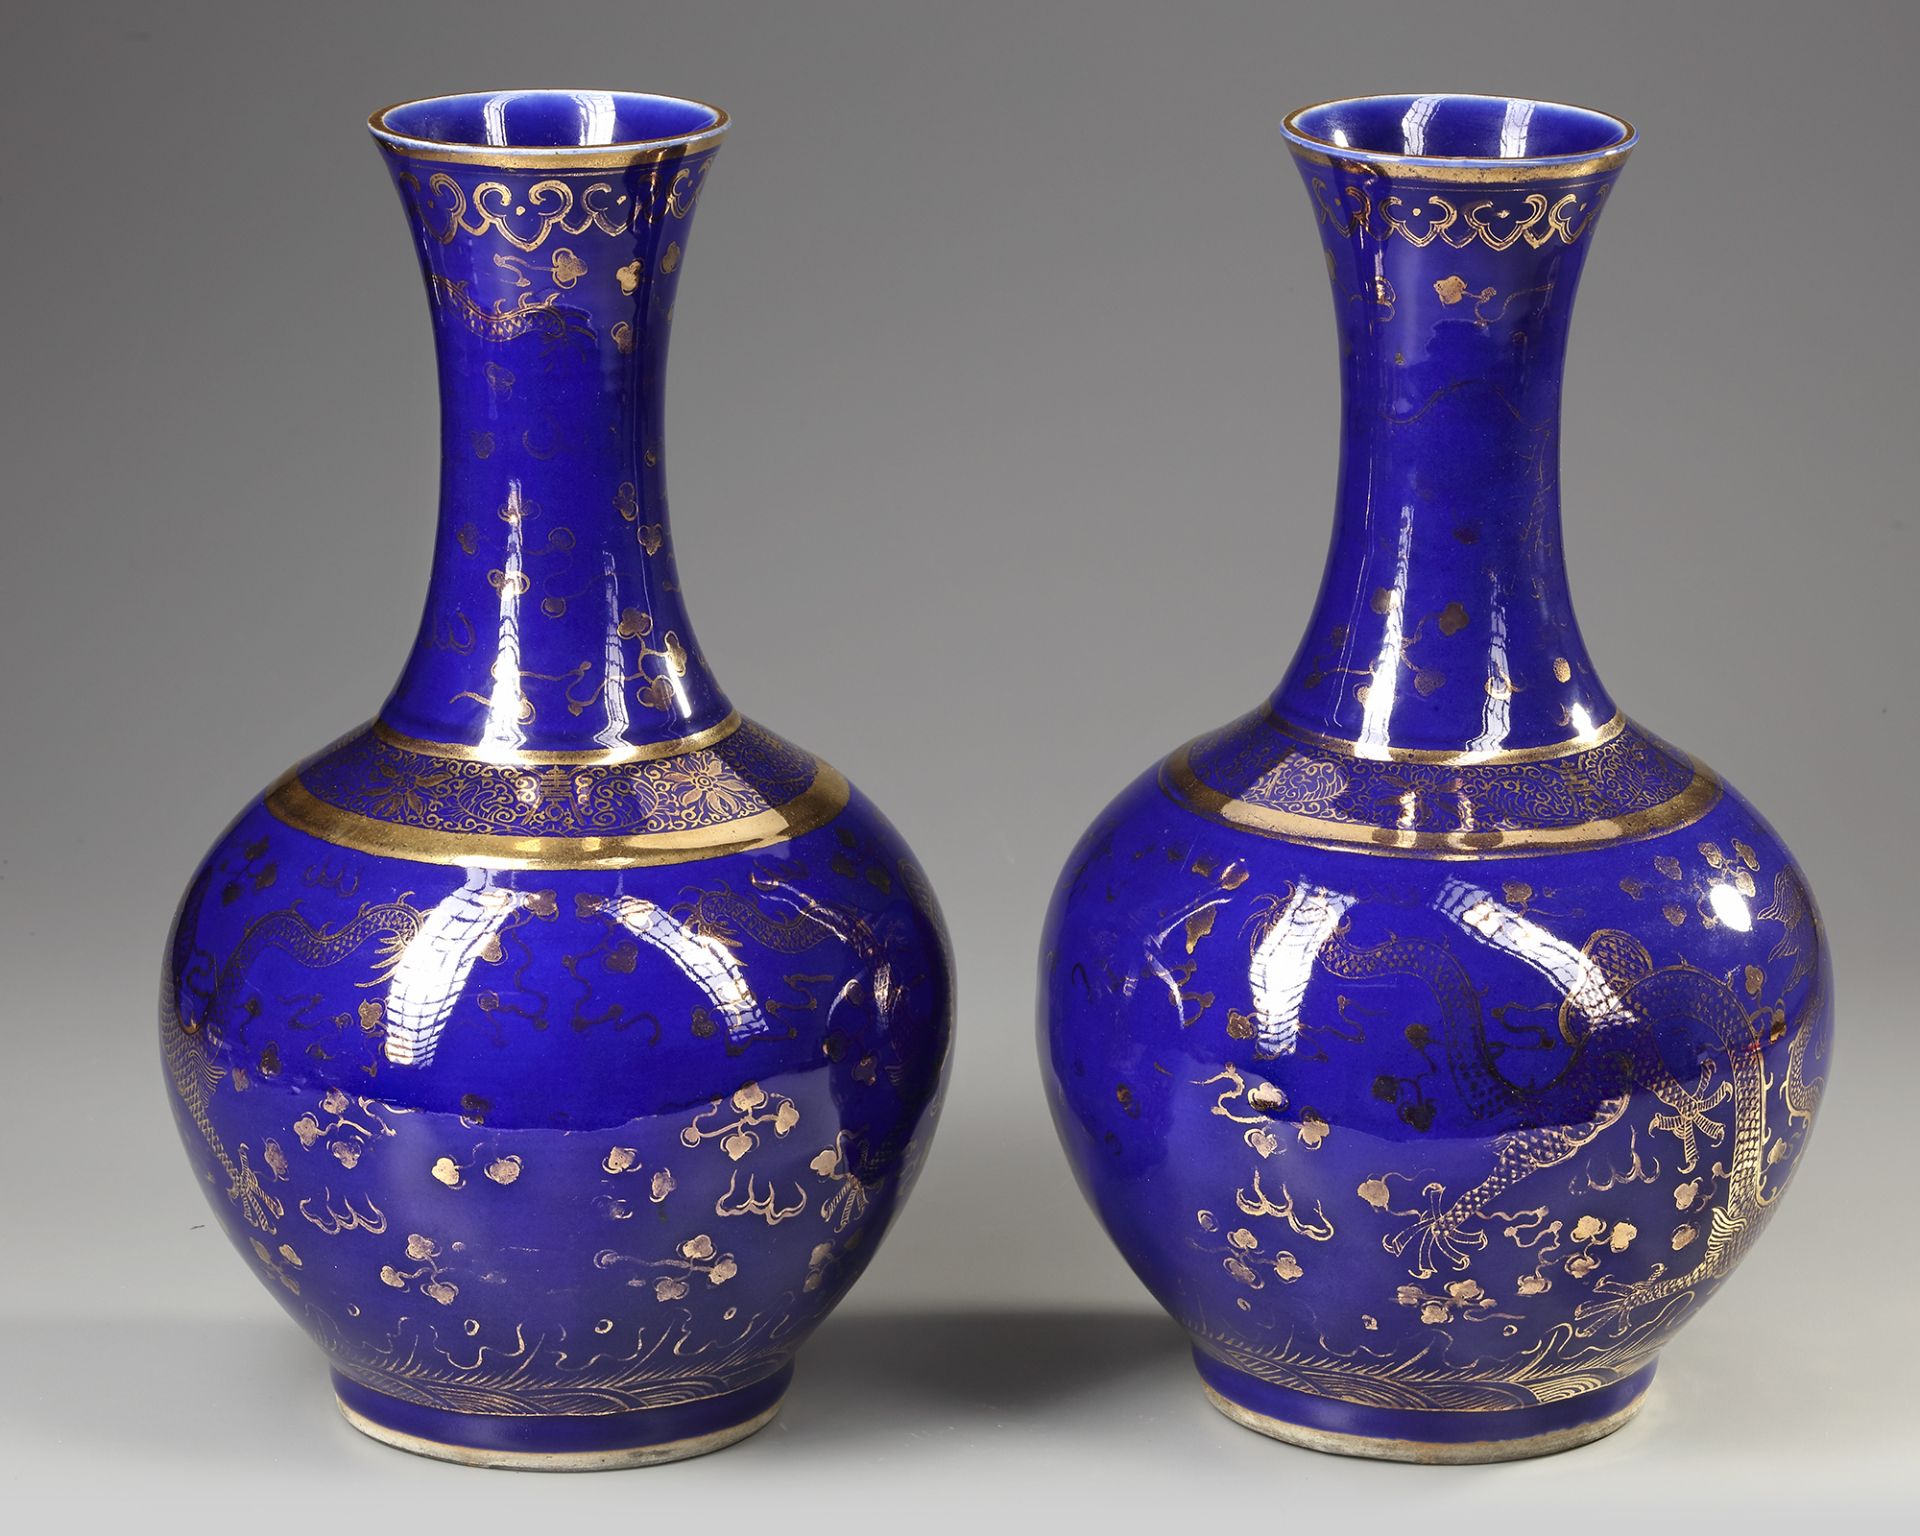 A PAIR OF CHINESE GILT POWDER-BLUE BOTTLE VASES, LATE 19TH-EARLY 20TH CENTURY - Image 2 of 4